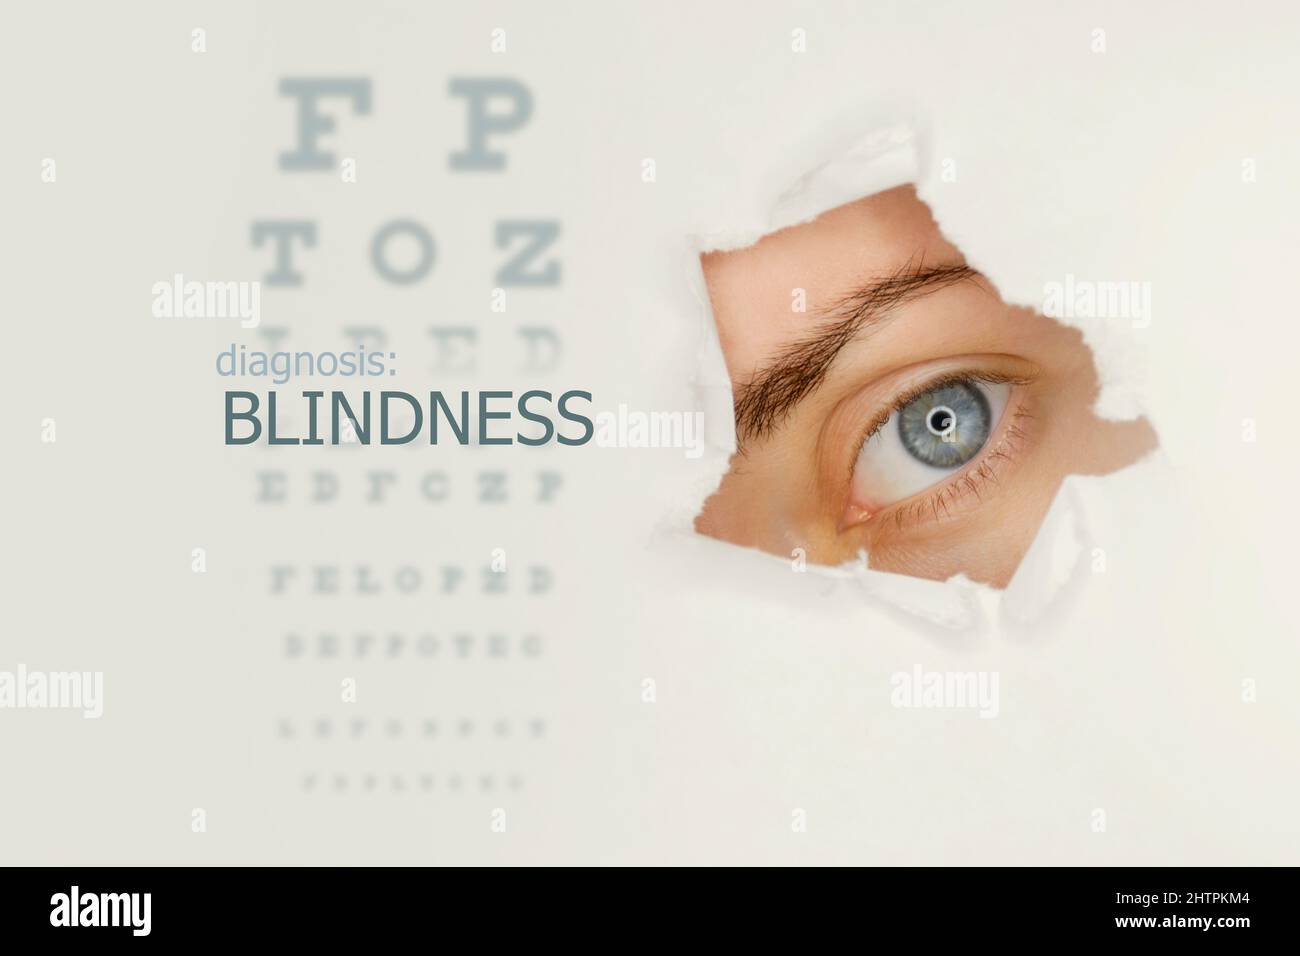 Blindness disease poster with eye test chart and blue eye on right.Studio grey background Stock Photo